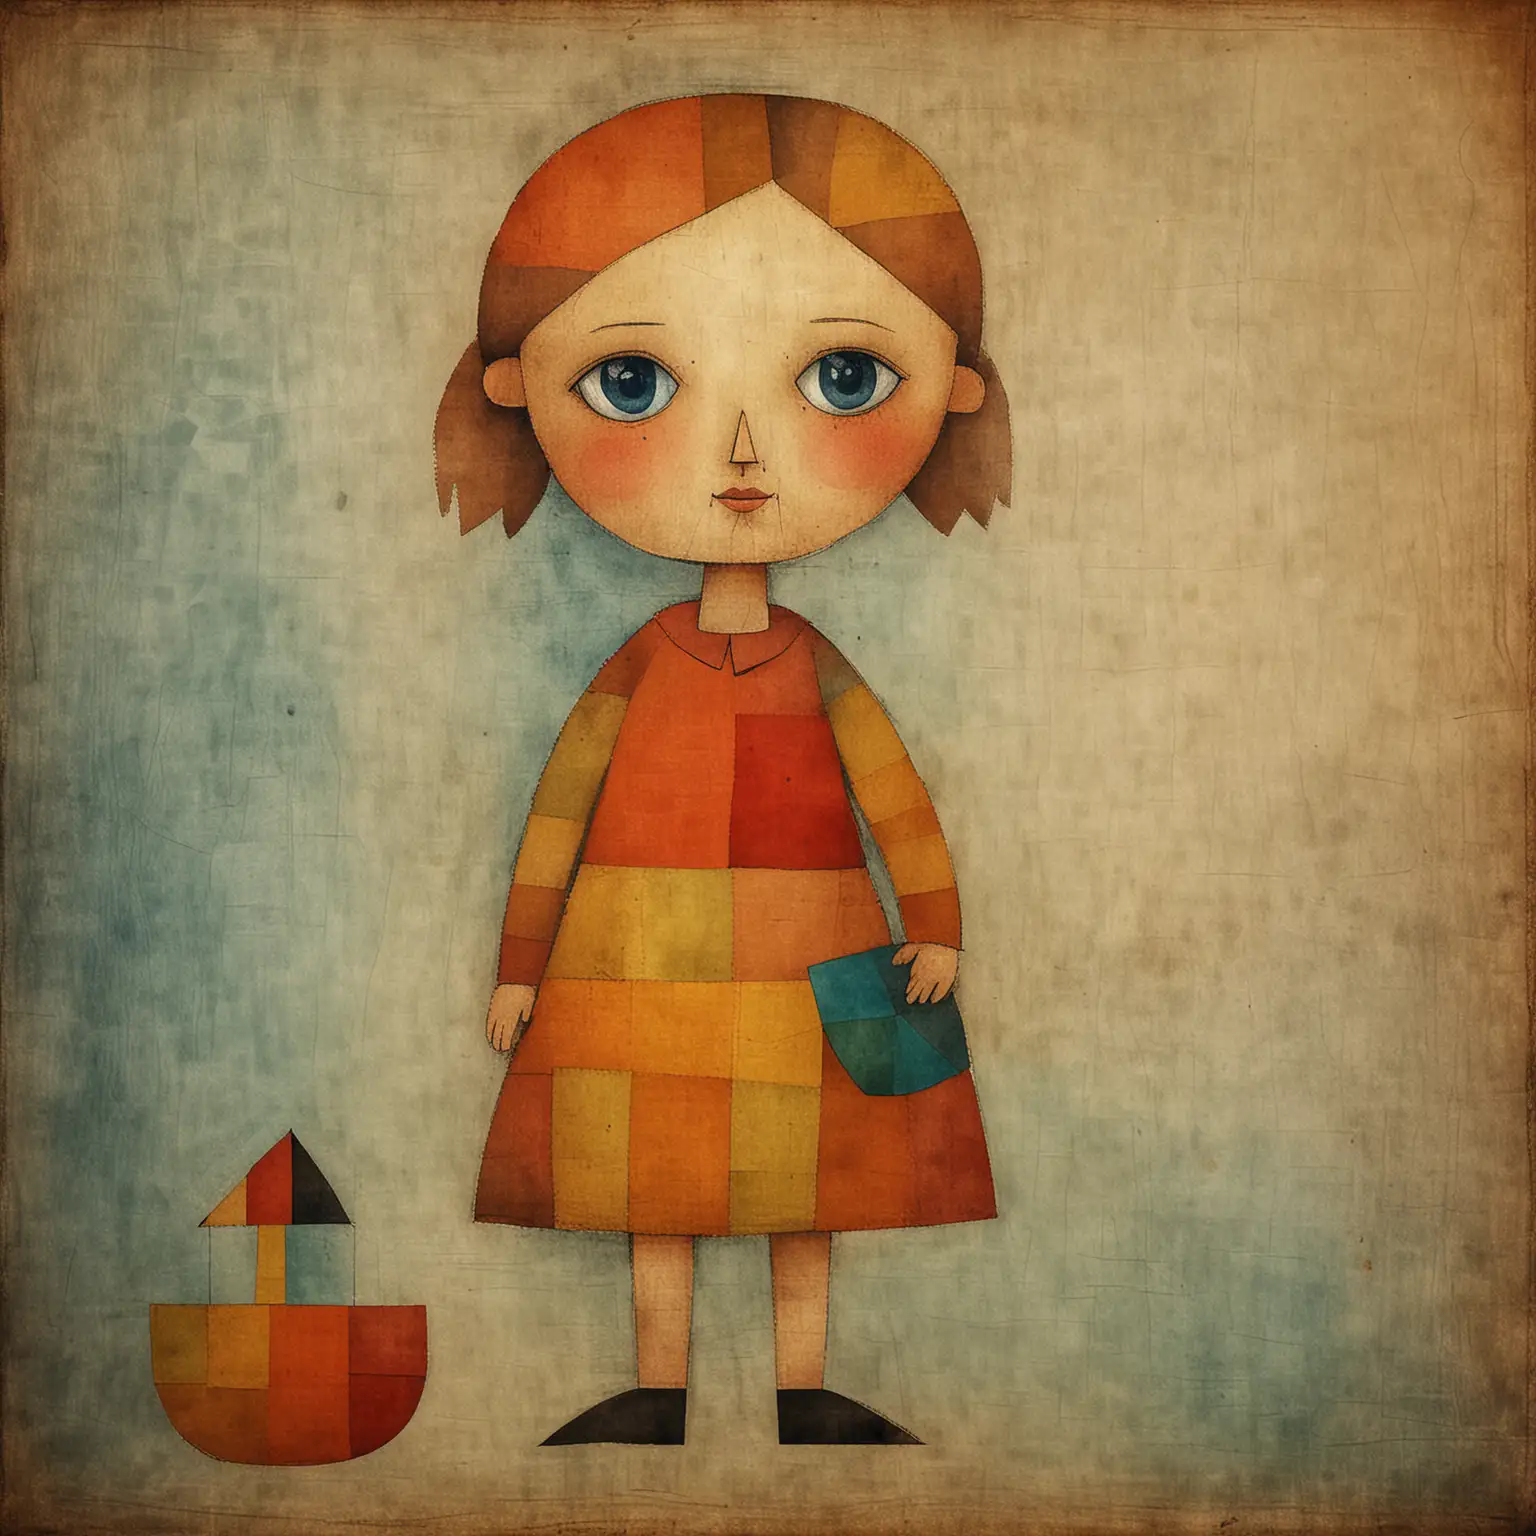 Playful Girl Child with Toy Inspired by Paul Klee